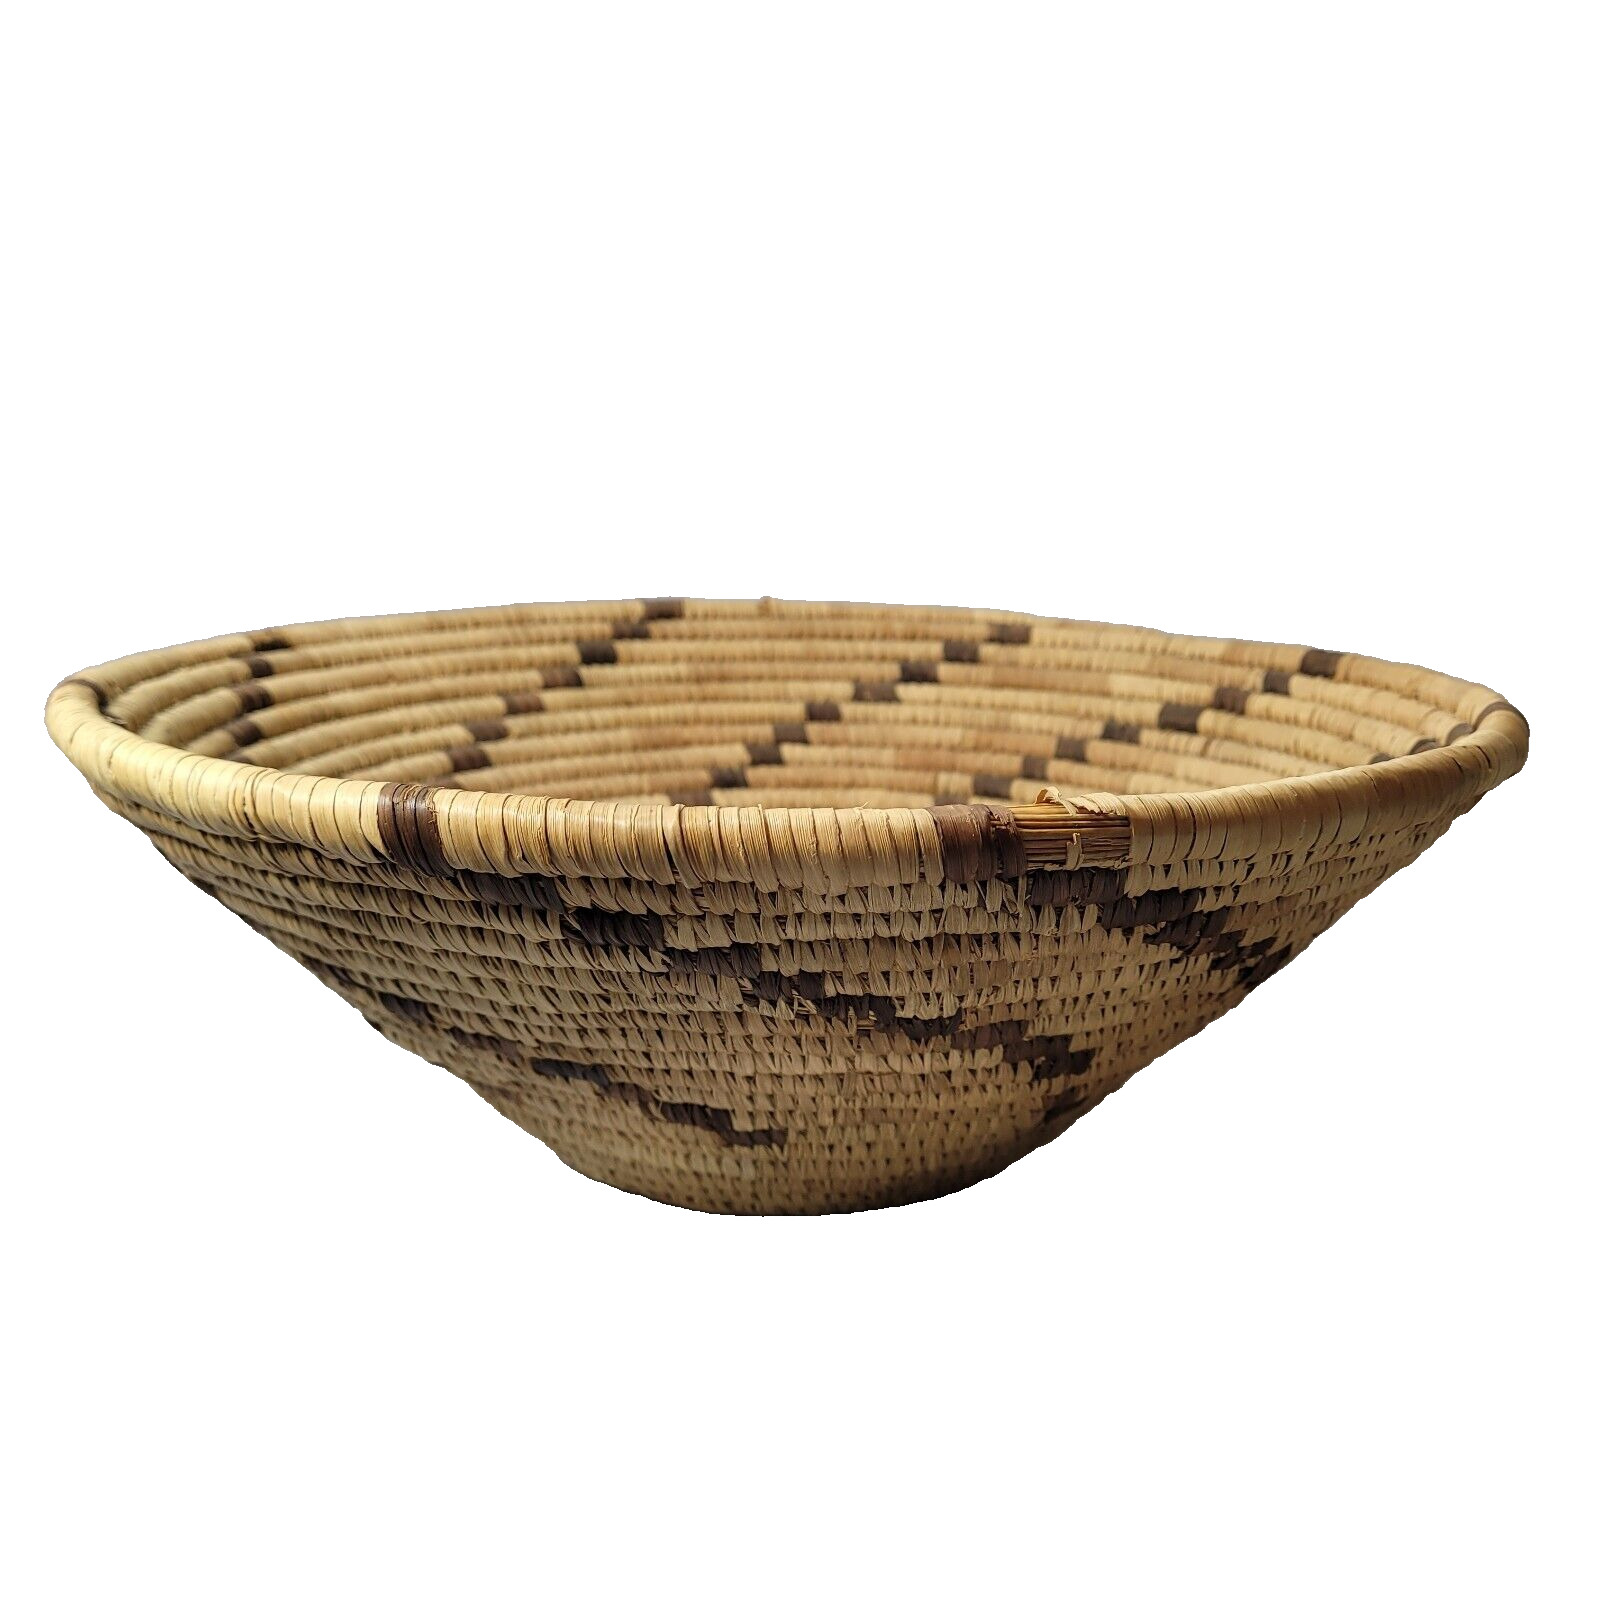 OLD Papago Native American Indian Coil Basket 5 H x 13 Diameter